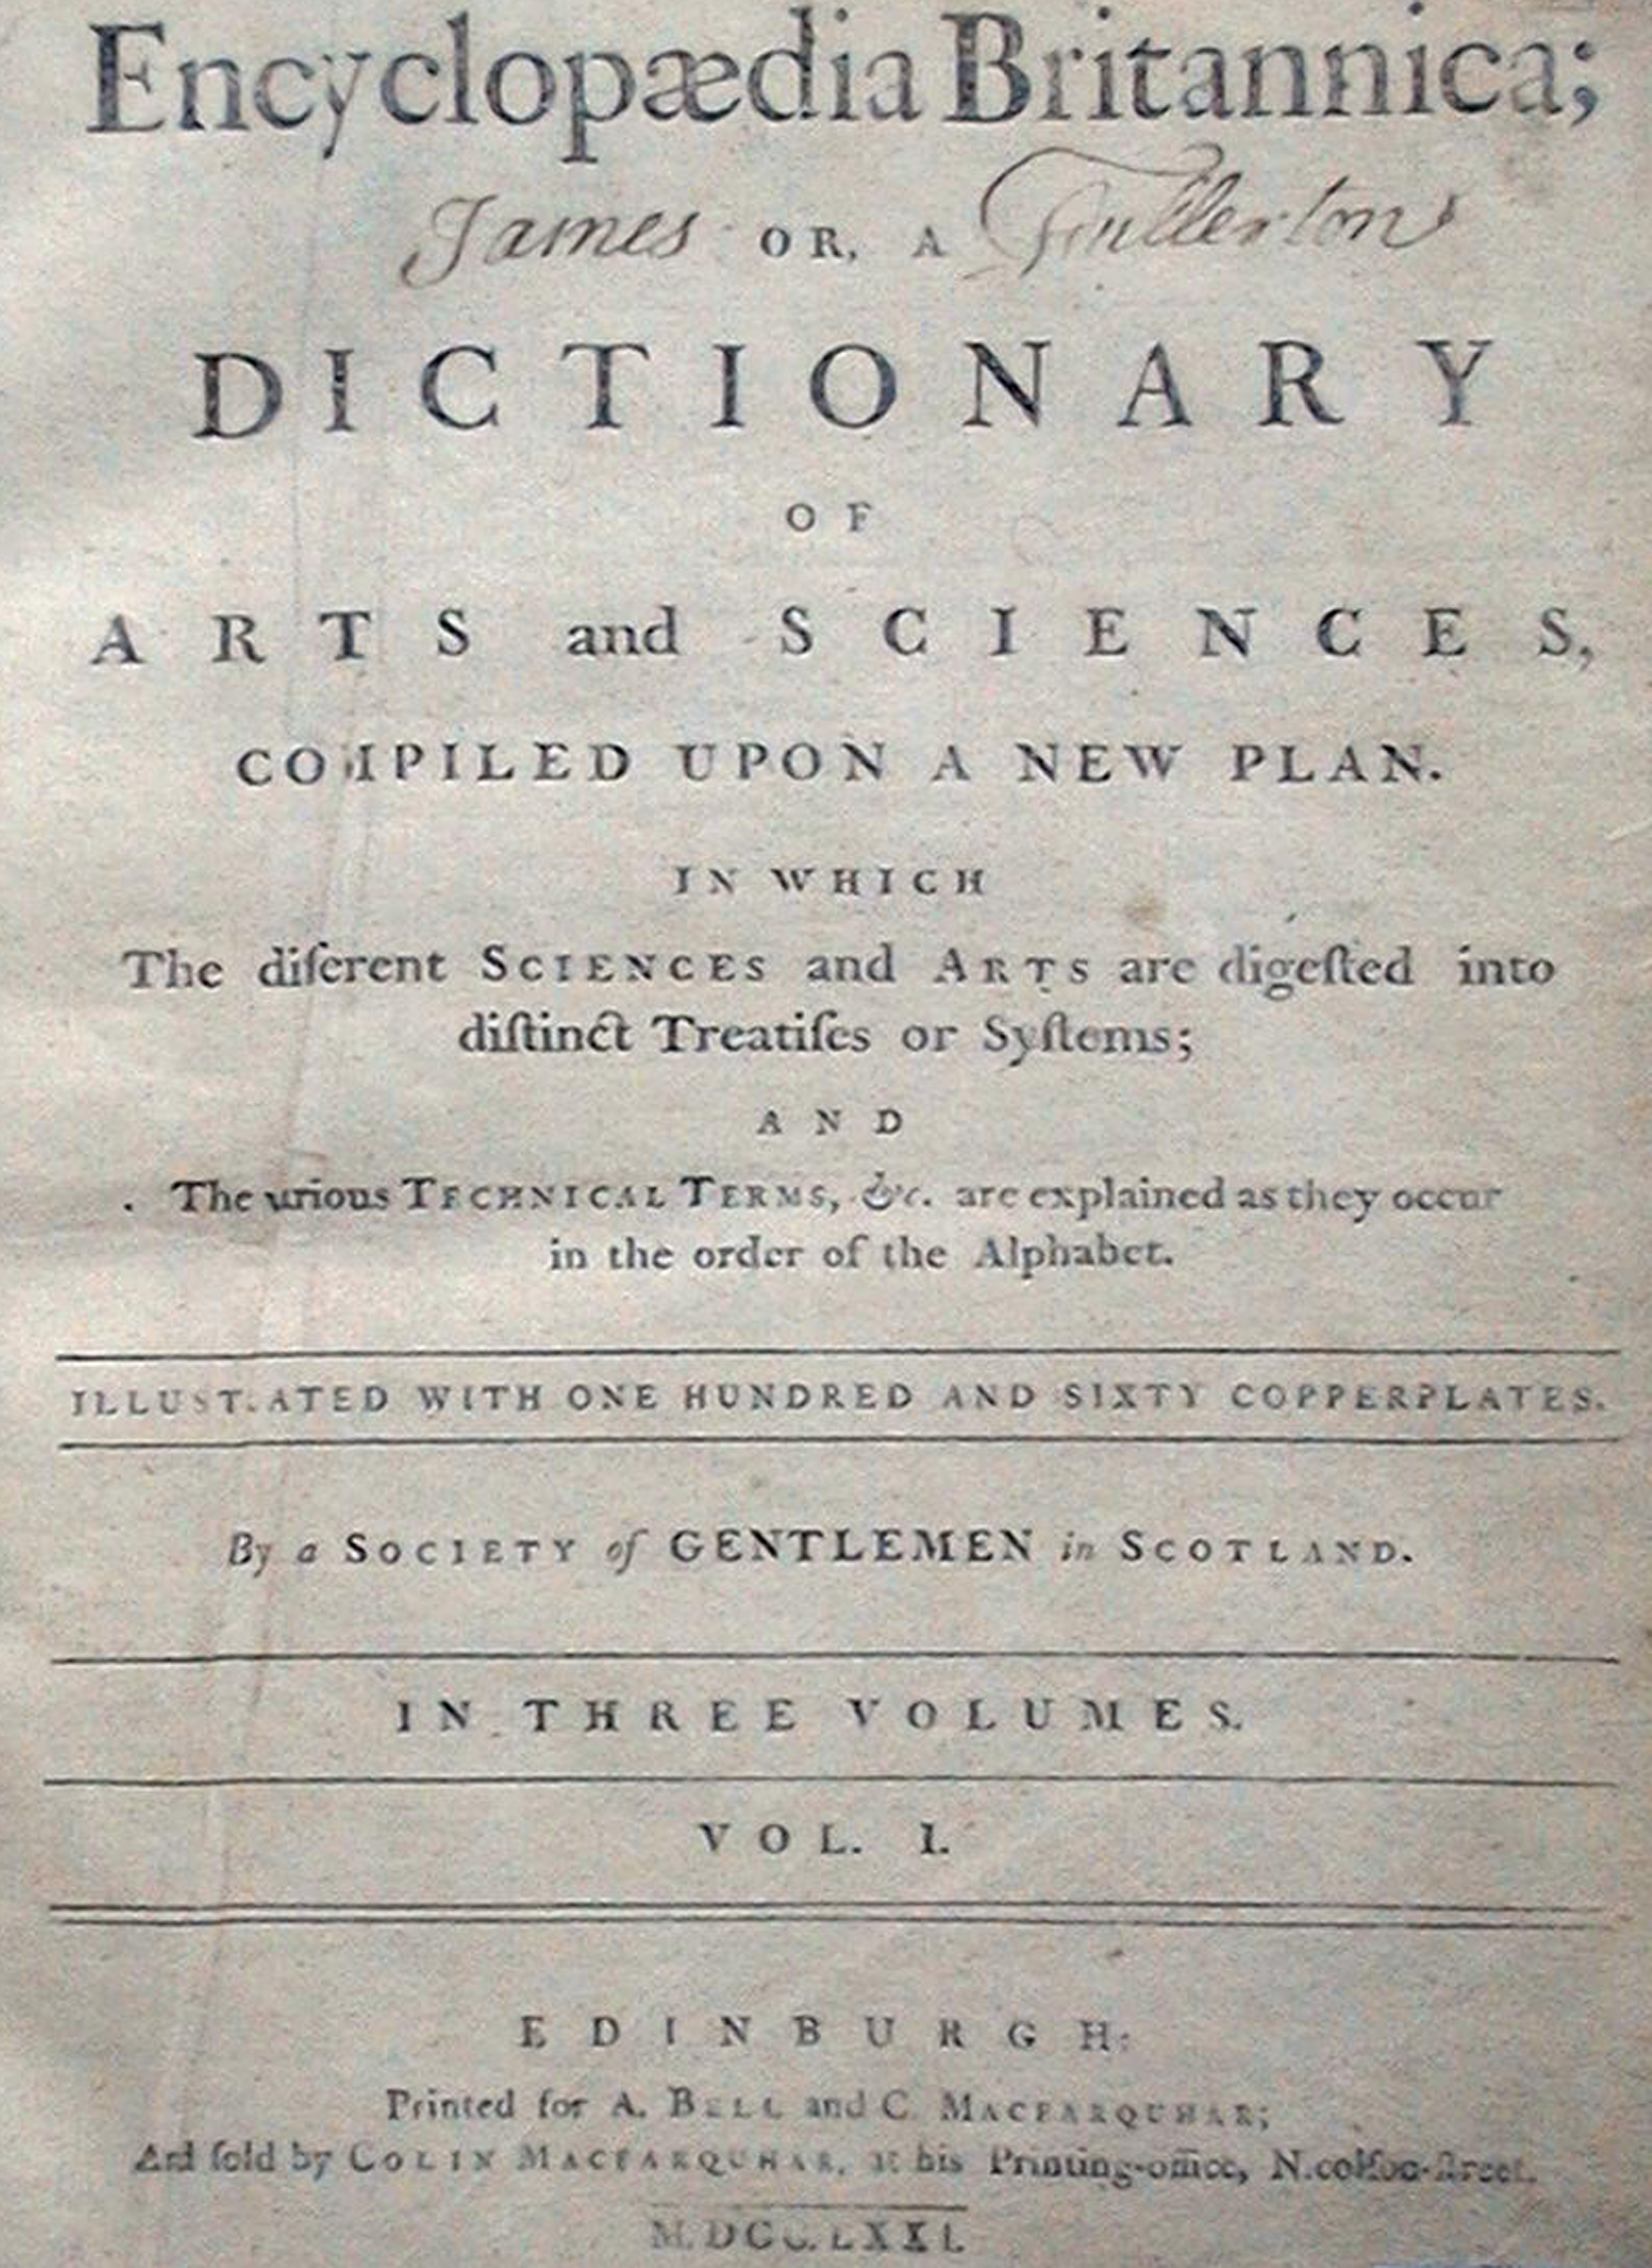 title-page-of-the-first-edition-of-the-britannica-edinburgh-1768_image-credited-to-national-library-scotland